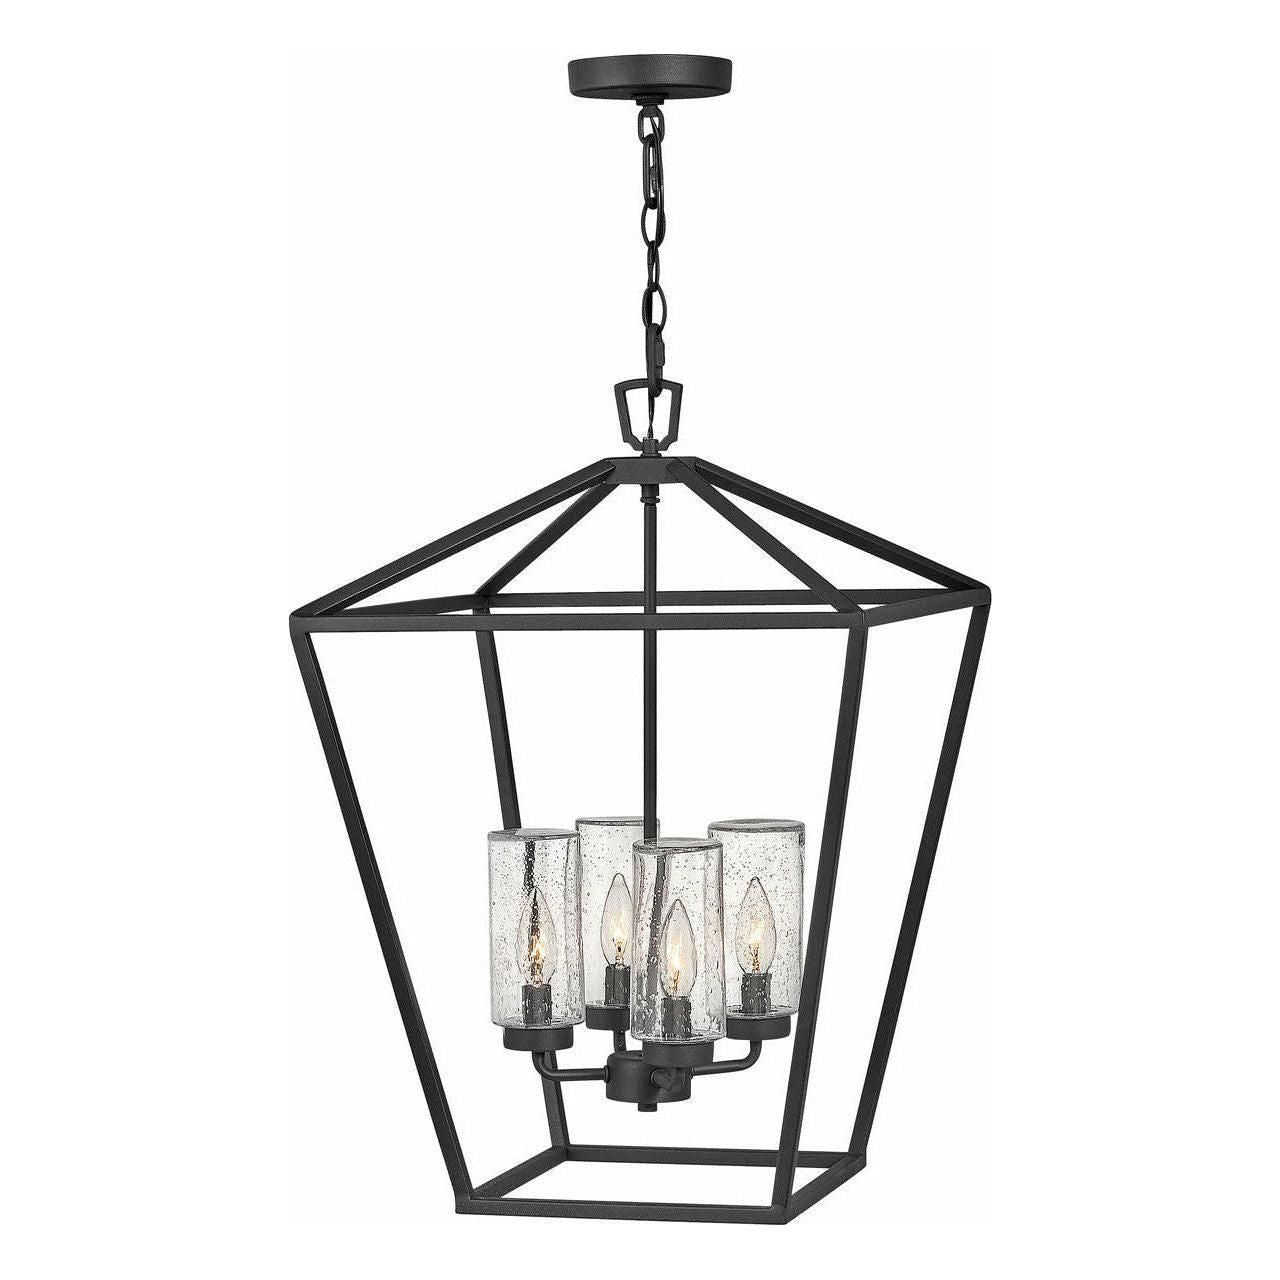 Hinkley - Hinkley Alford Place Outdoor Pendant - Lights Canada